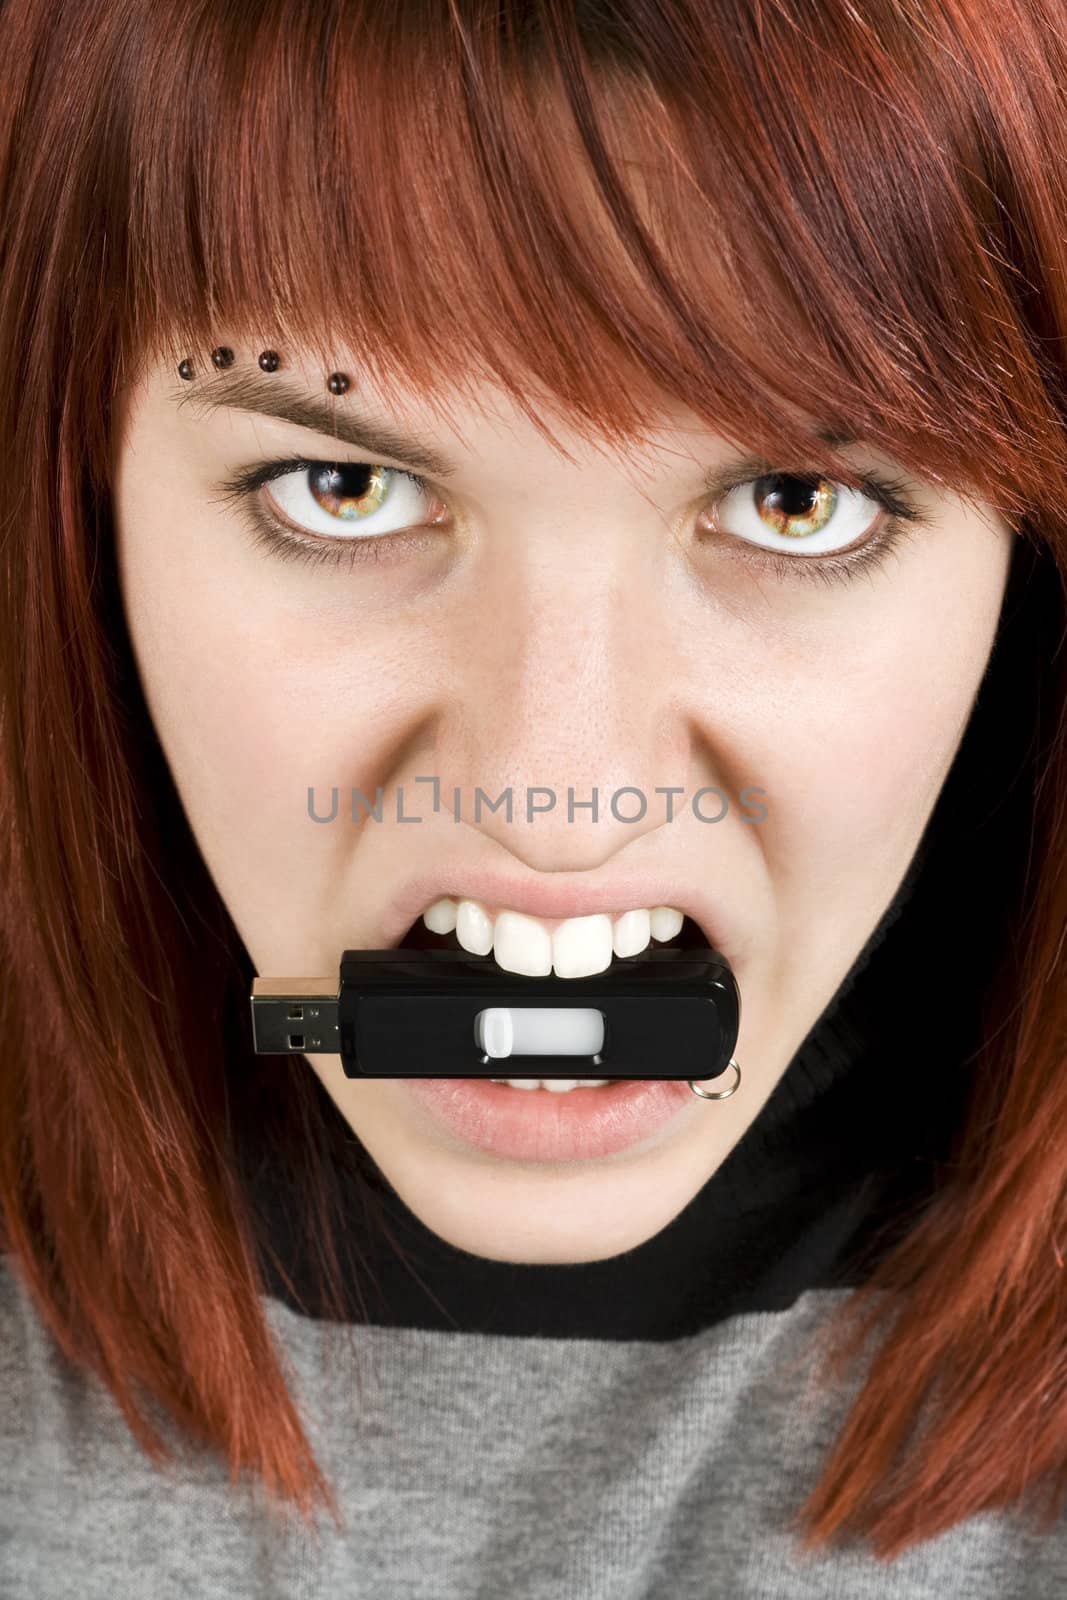 Beautiful redhead girl biting an usb memory stick with eyes on fire. Concept alluding to hate against computers or computer equipment.

Studio shot.